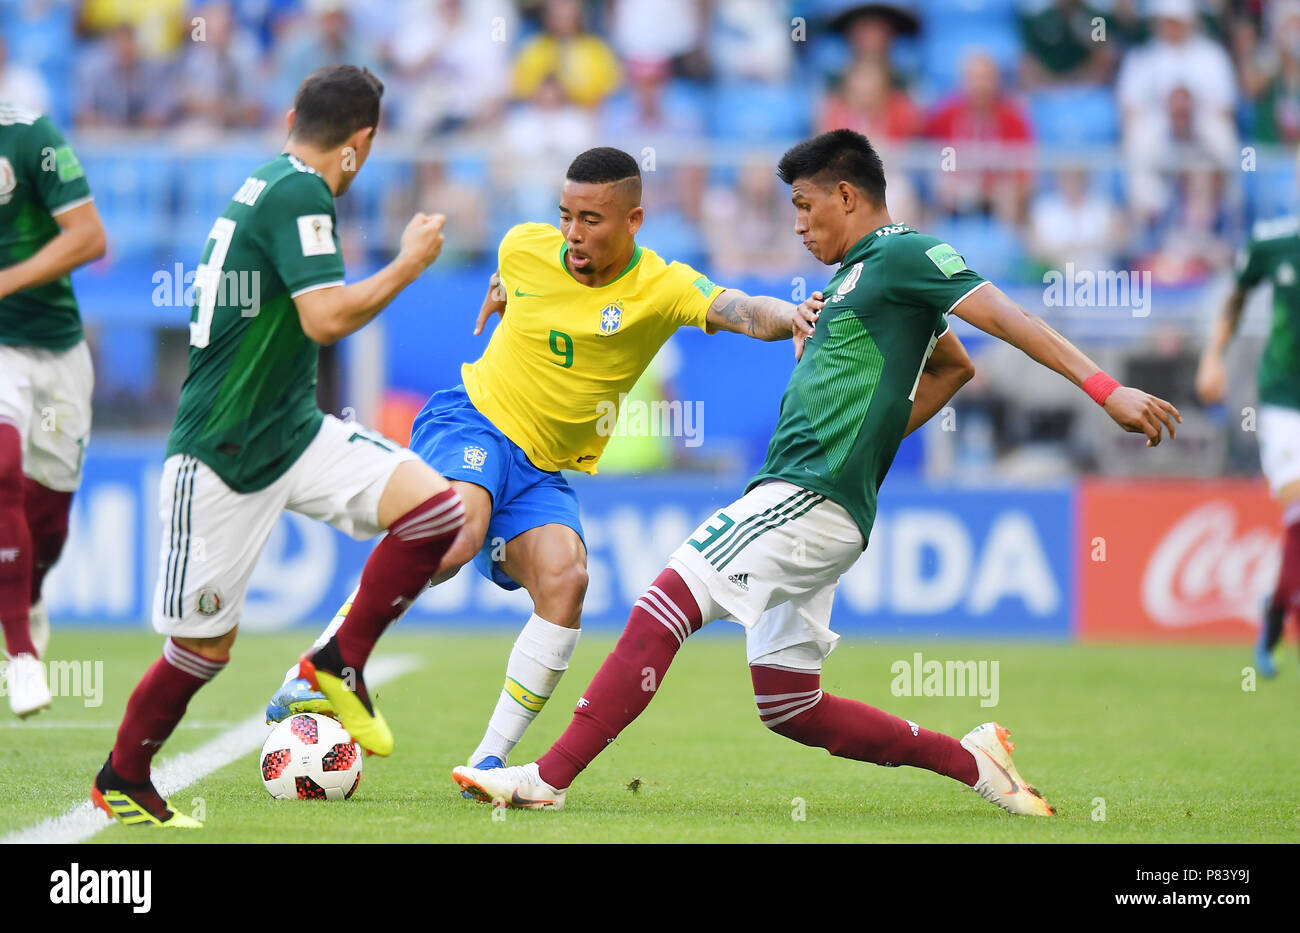 SAMARA, RUSSIA - JULY 02: Andres Guardado and Jesus Gallardo of Mexico competes with Gabriel Jesus of Brazil during the 2018 FIFA World Cup Russia Round of 16 match between Brazil and Mexico at Samara Arena on July 2, 2018 in Samara, Russia. (Photo by Lukasz Laskowski/PressFocus/MB Media) Stock Photo